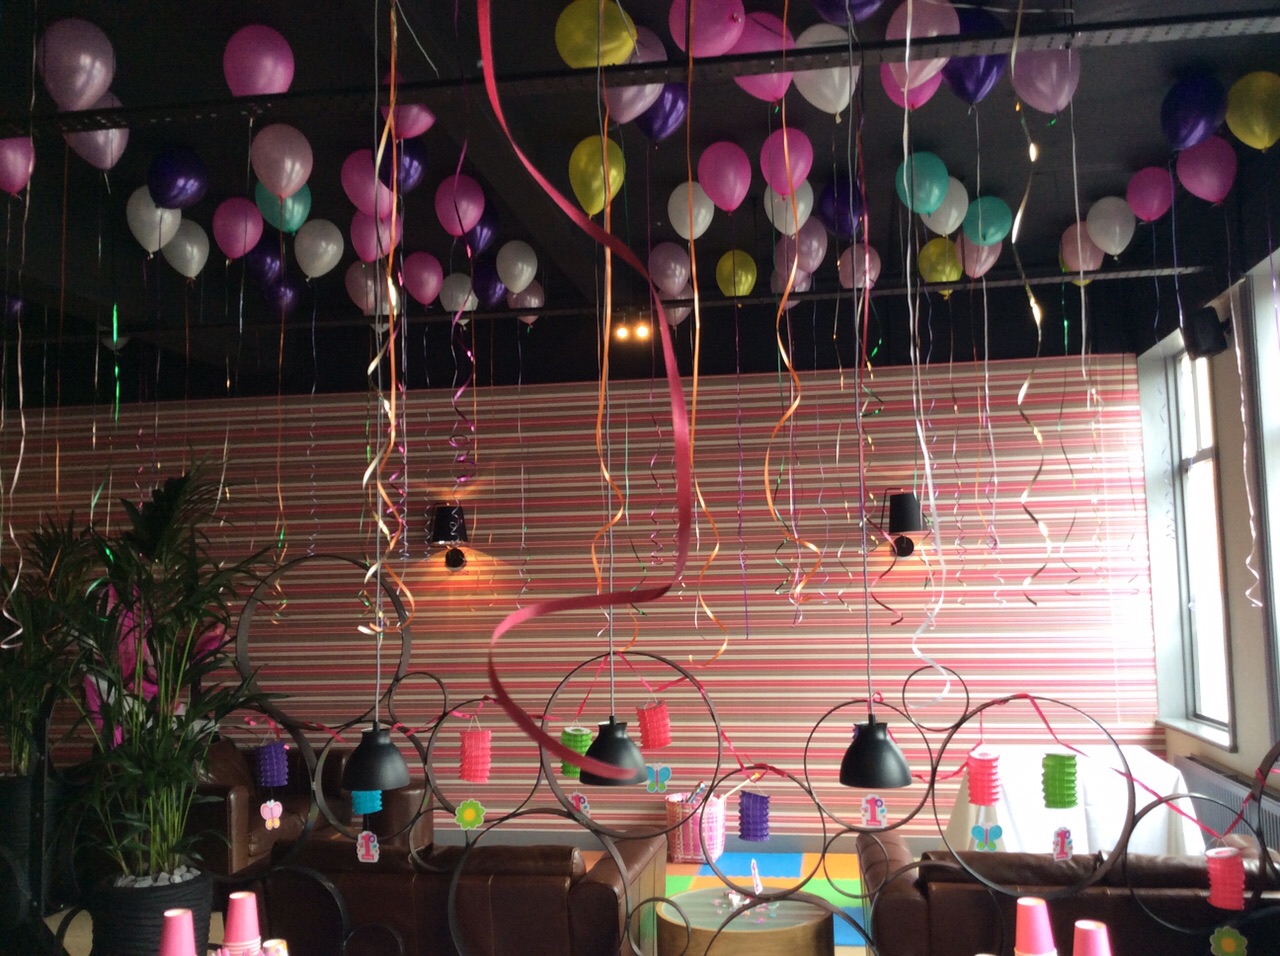 You are currently viewing 1st Birthday at Sapori Italian Restaurant Ansty Leicestershire using ceiling fill balloons with some doorway and table balloons